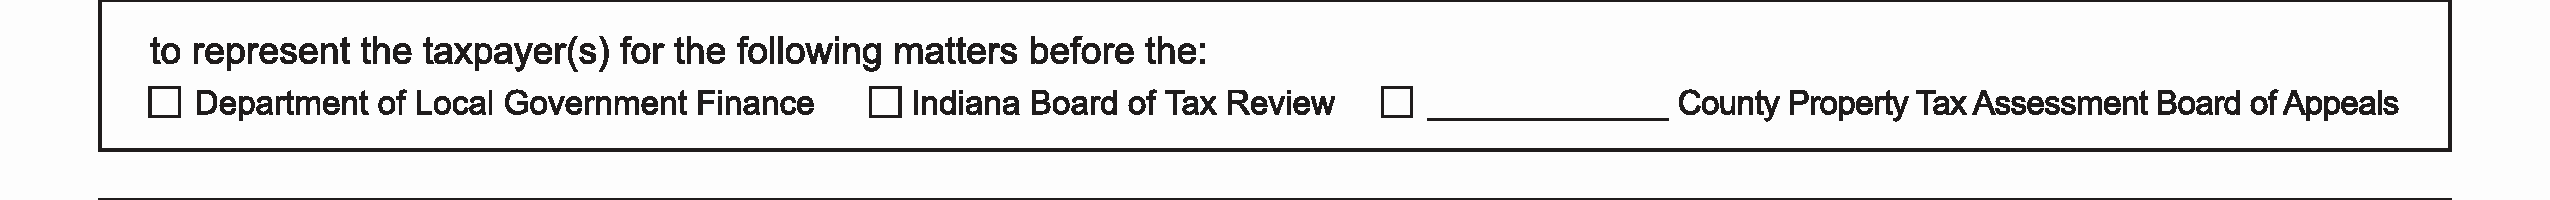 Indiana Tax Power of Attorney (Form 23261) (R76-10)